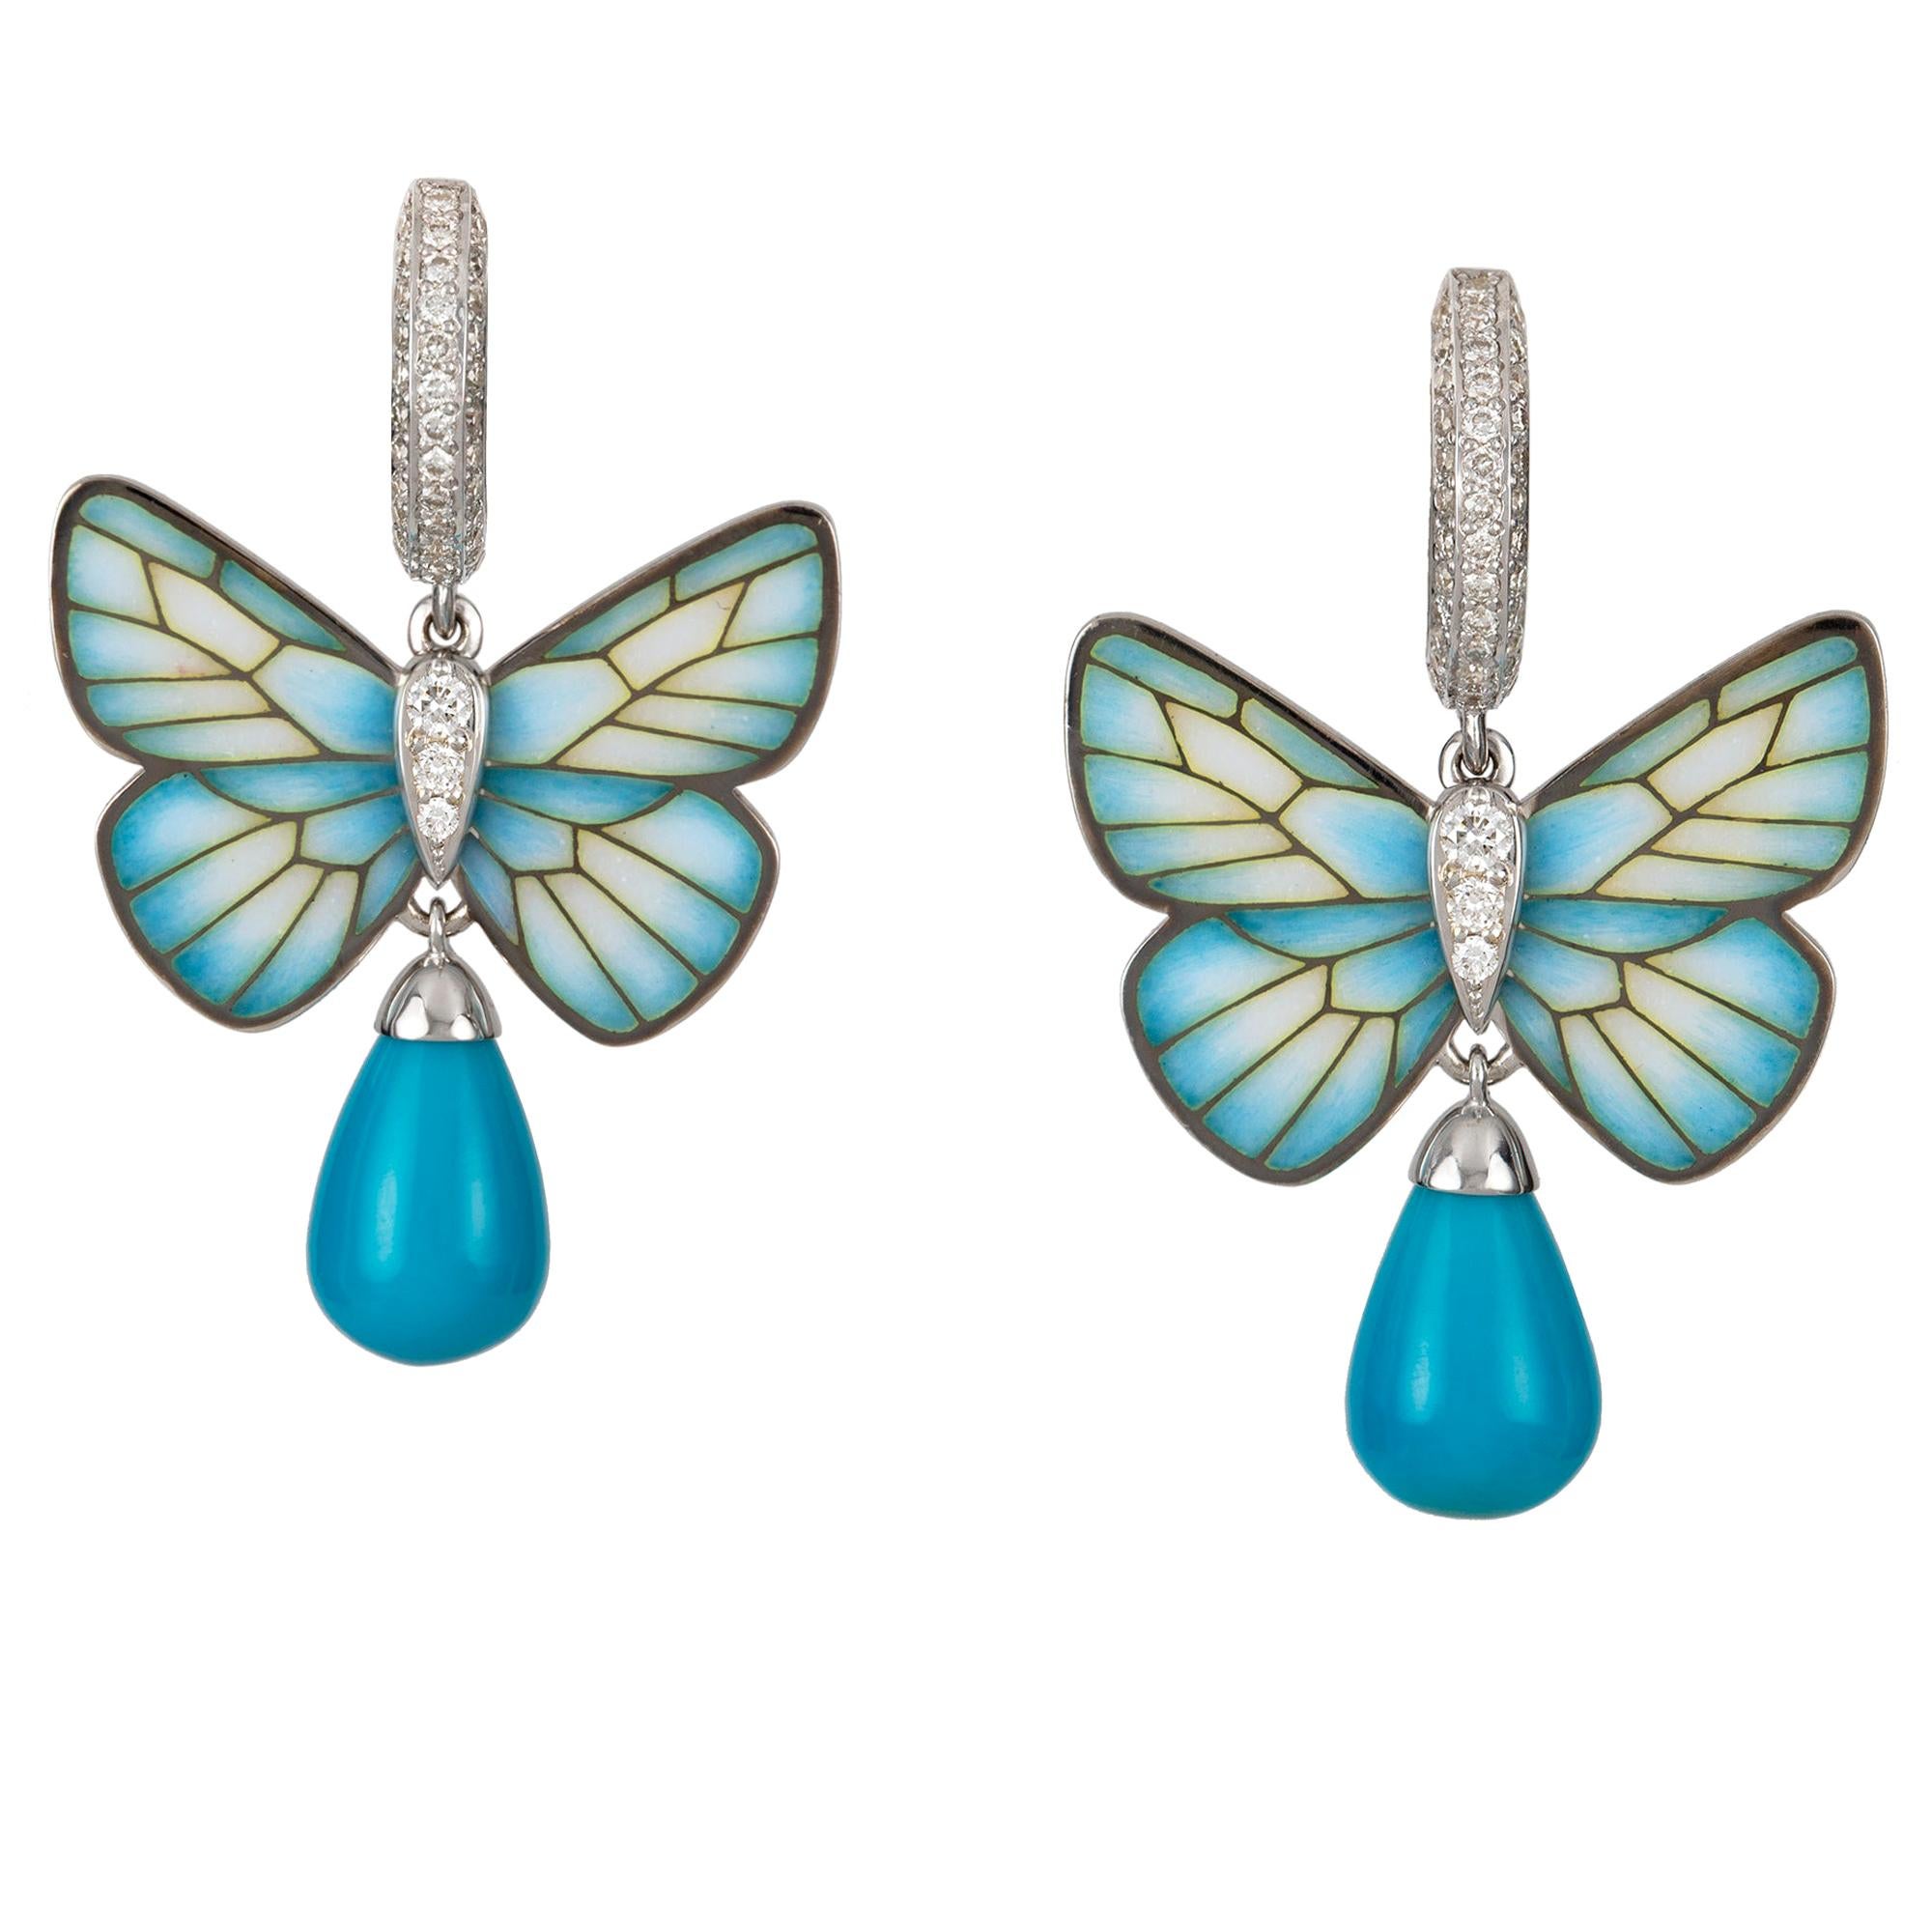 Pair of Turquoise Butterfly Earrings by Ilgiz F